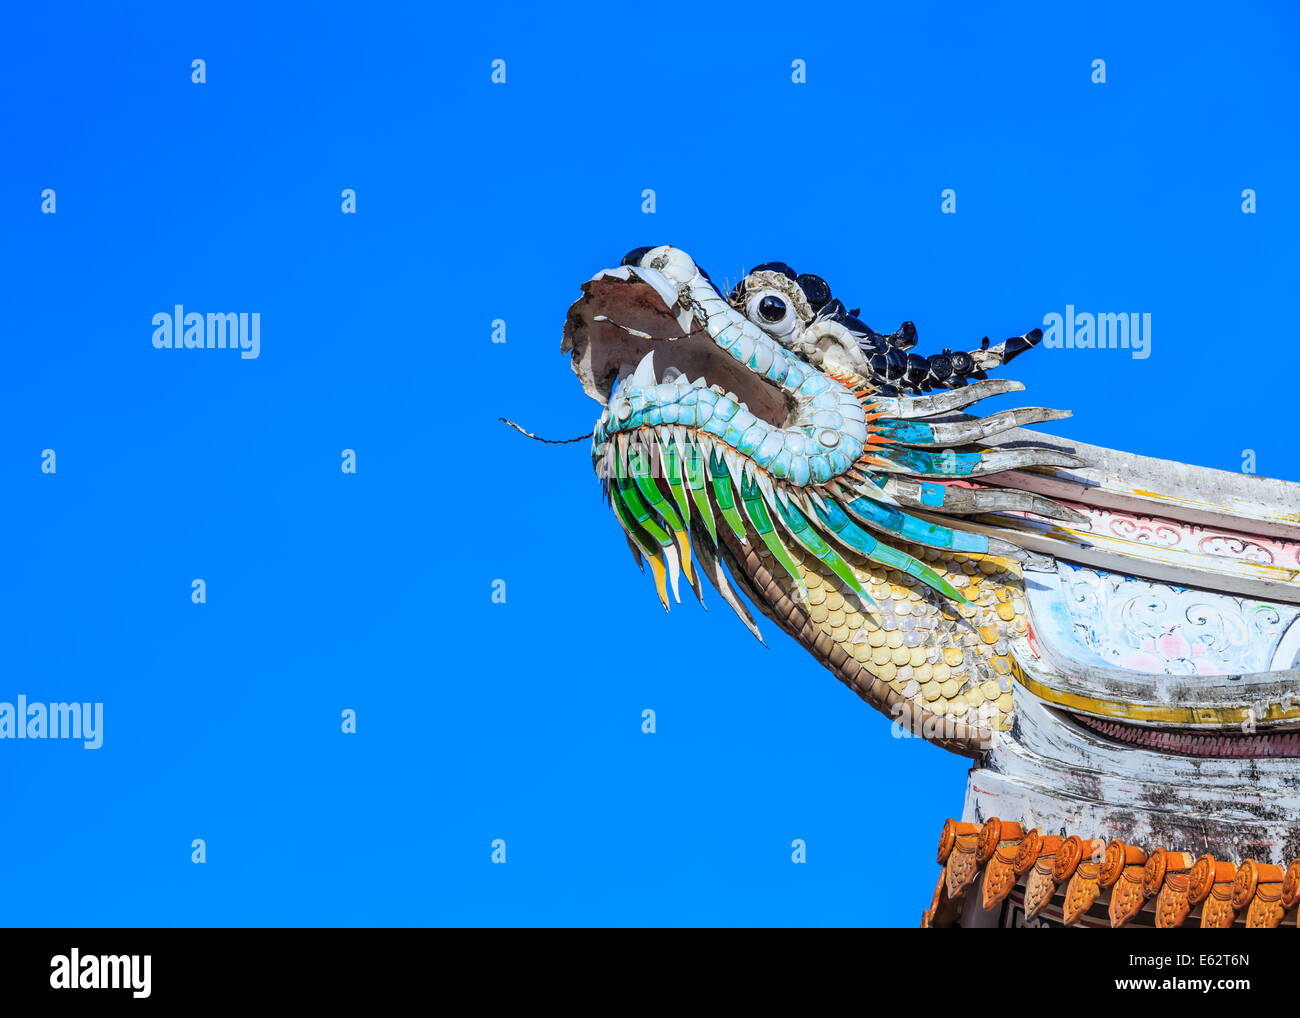 A dragon statue on the roof of a Chinese temple Stock Photo